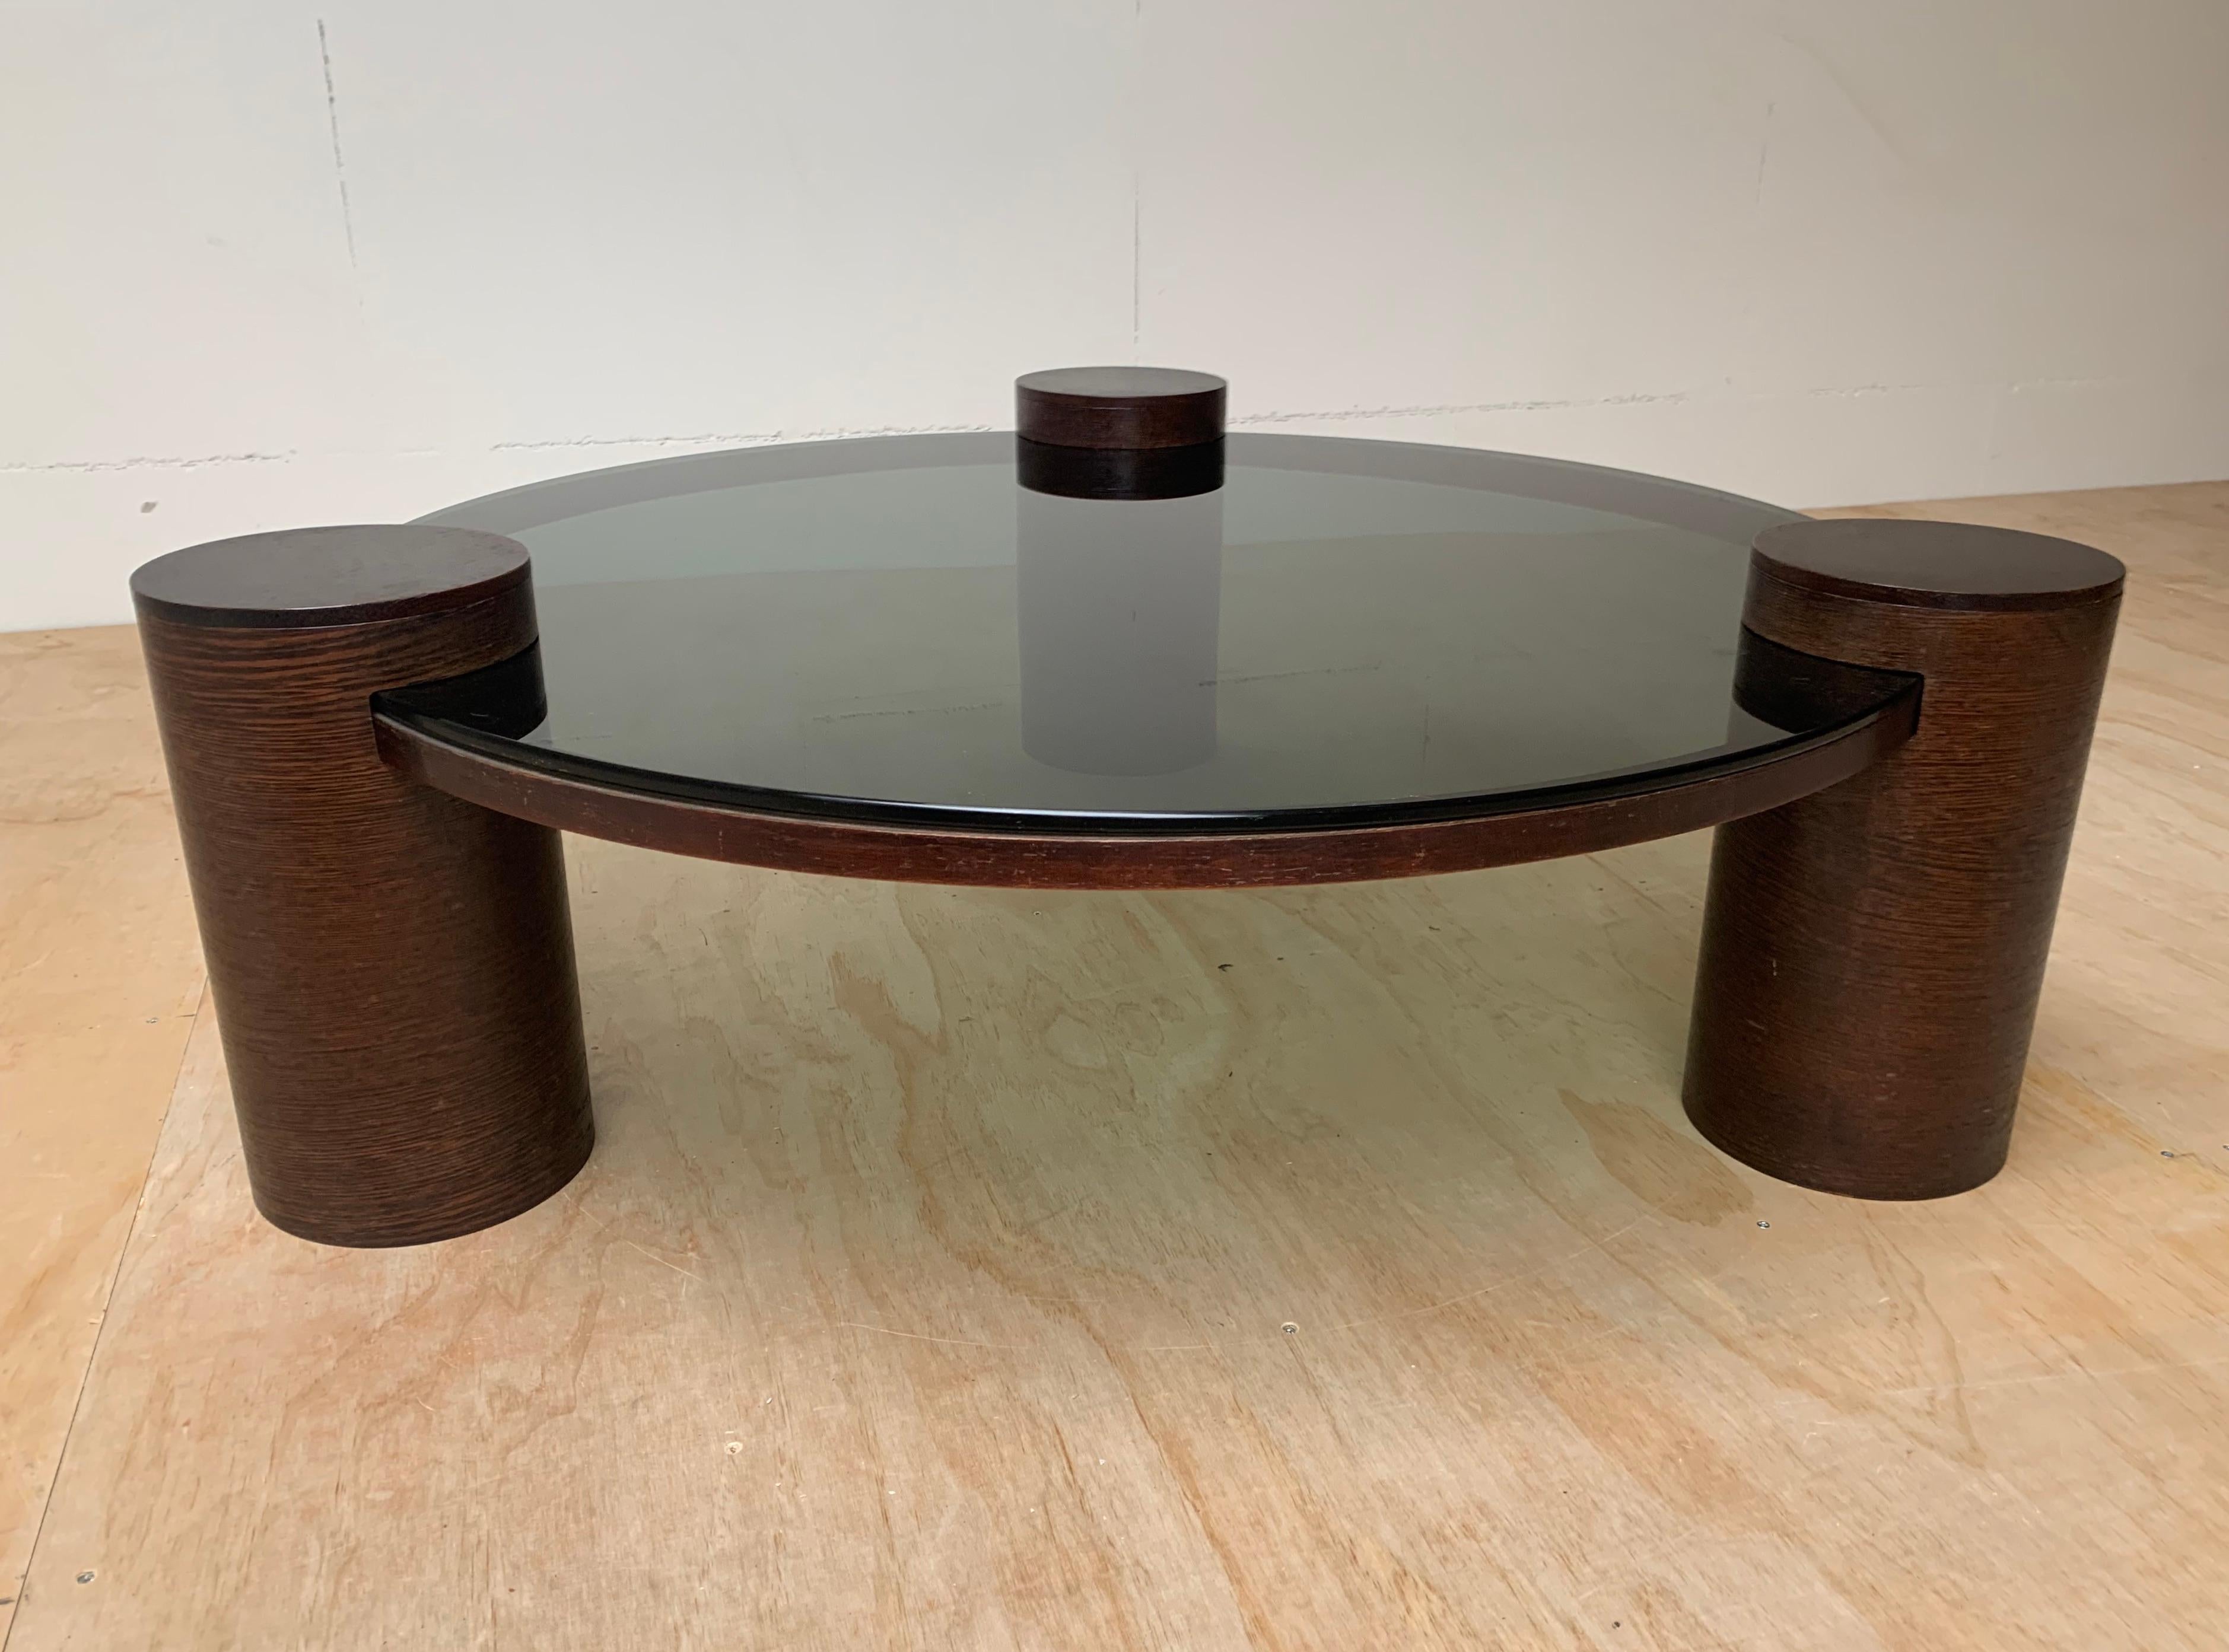 Unique Midcentury Modern Smoked Green Glass Coffee Table w Three Wooden Columns In Good Condition For Sale In Lisse, NL